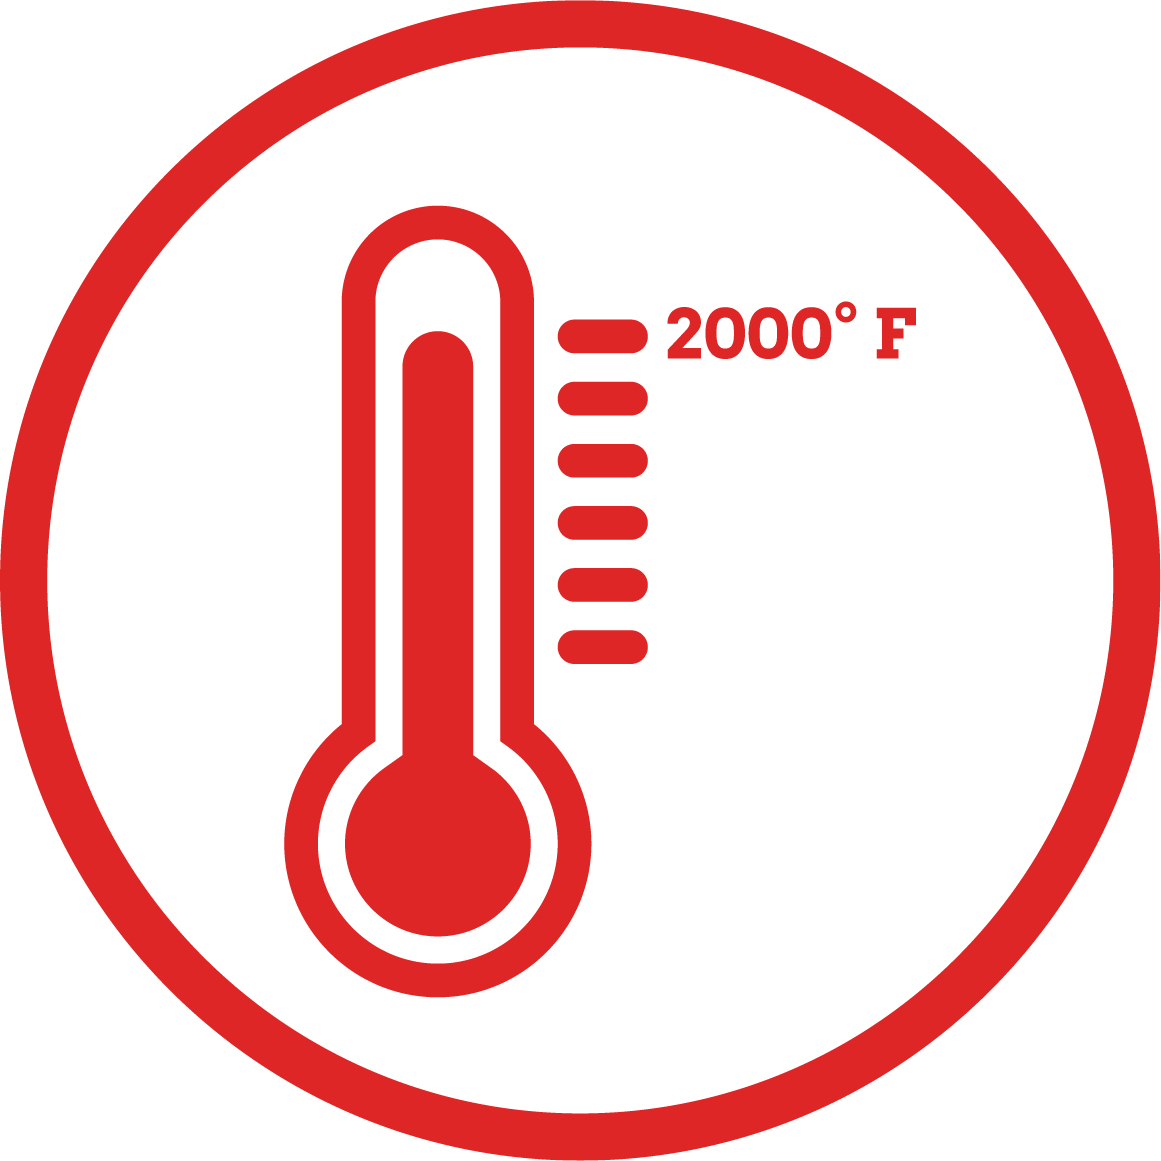 UMT thermometer